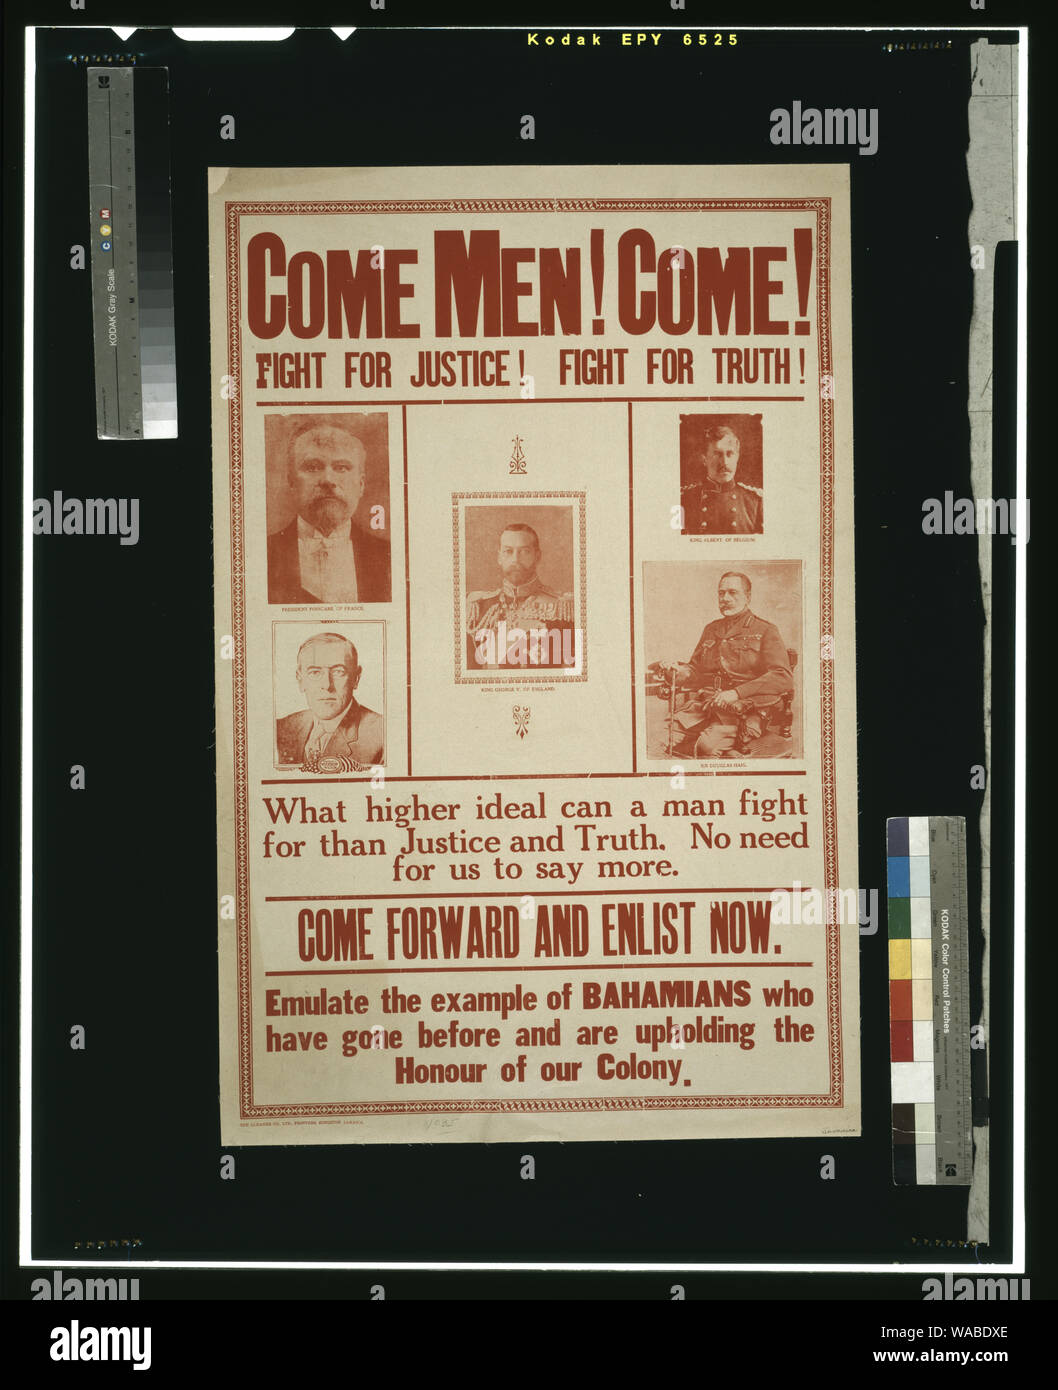 Come men! Come! Fight for justice! ... Emulate the example of Bahamians who have gone before and are upholding the honour of our colony Abstract: Poster showing small portraits of President Poincare of France, President Woodrow Wilson, King George V of England, King Albert of Belgium, and Sir Douglas Haig. Stock Photo